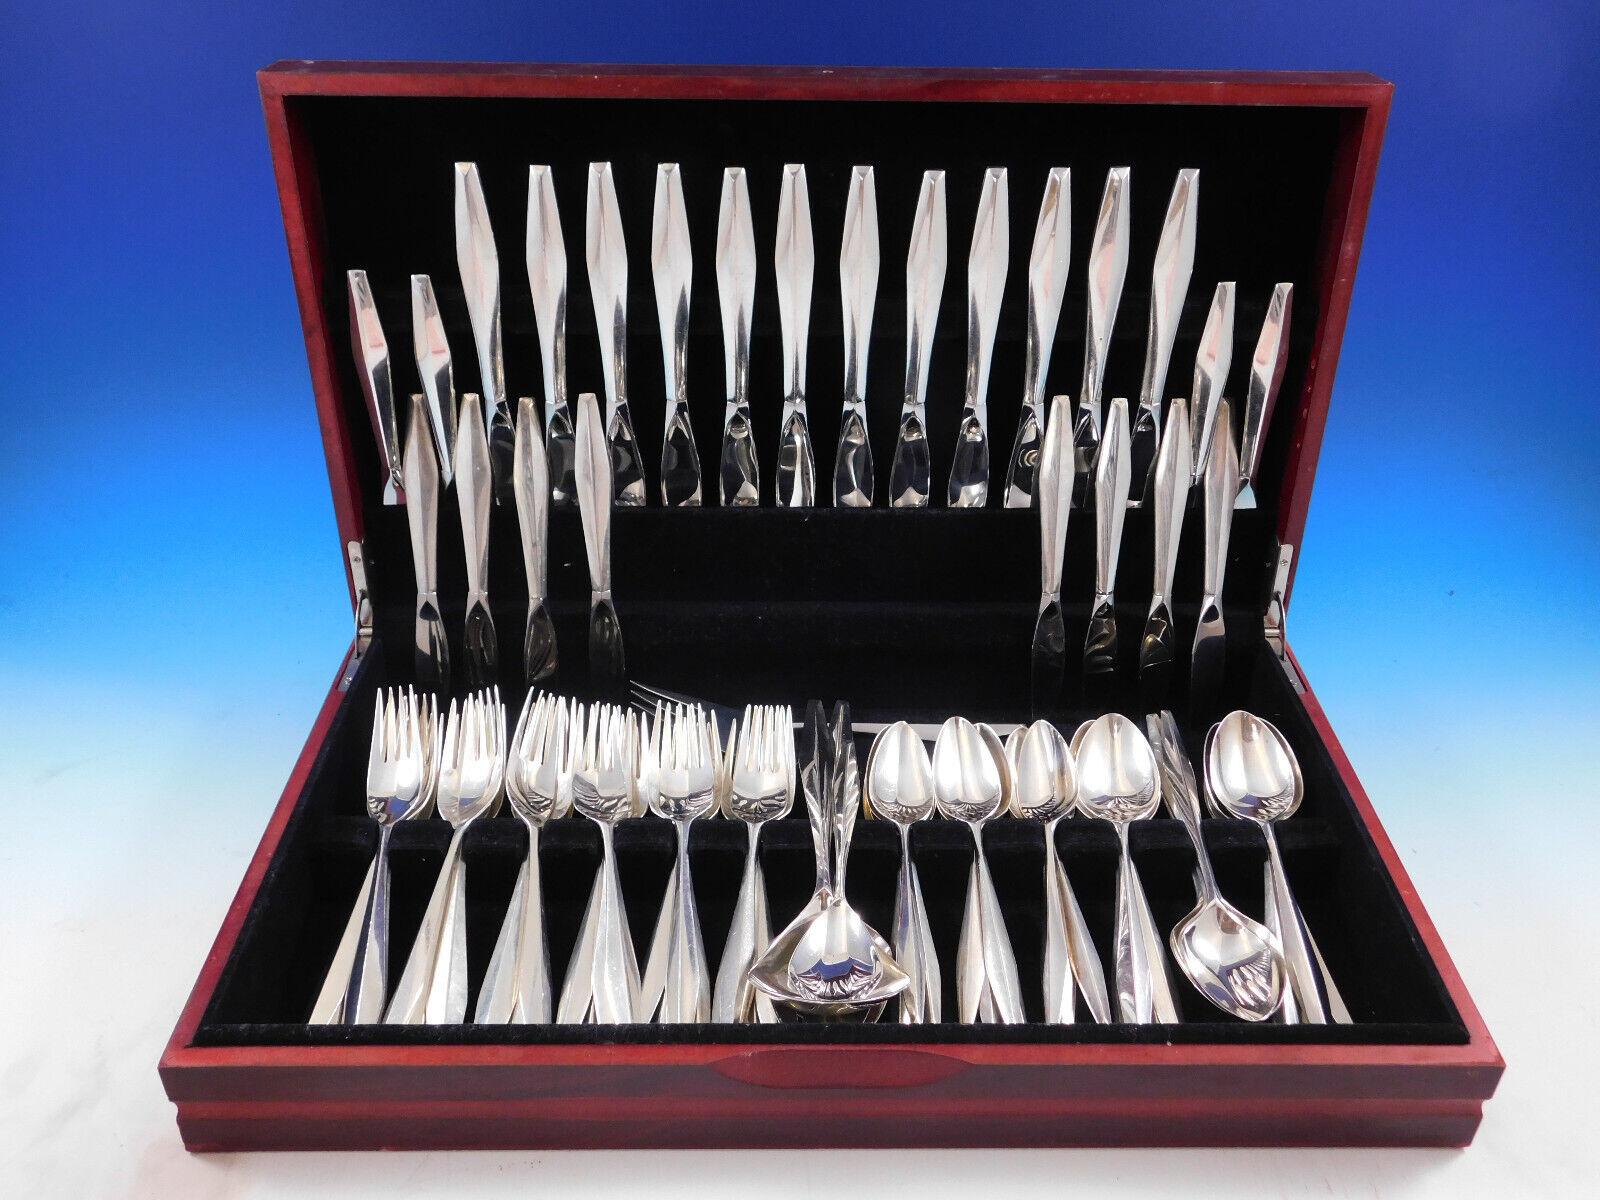 This pattern was designed by internationally renowned Italian architect and designer Gio Ponti and introduced by Reed & Barton in the year 1958. It has a wonderful Mid-Century Modern Design. This is our best selling Mid Century Modern flatware